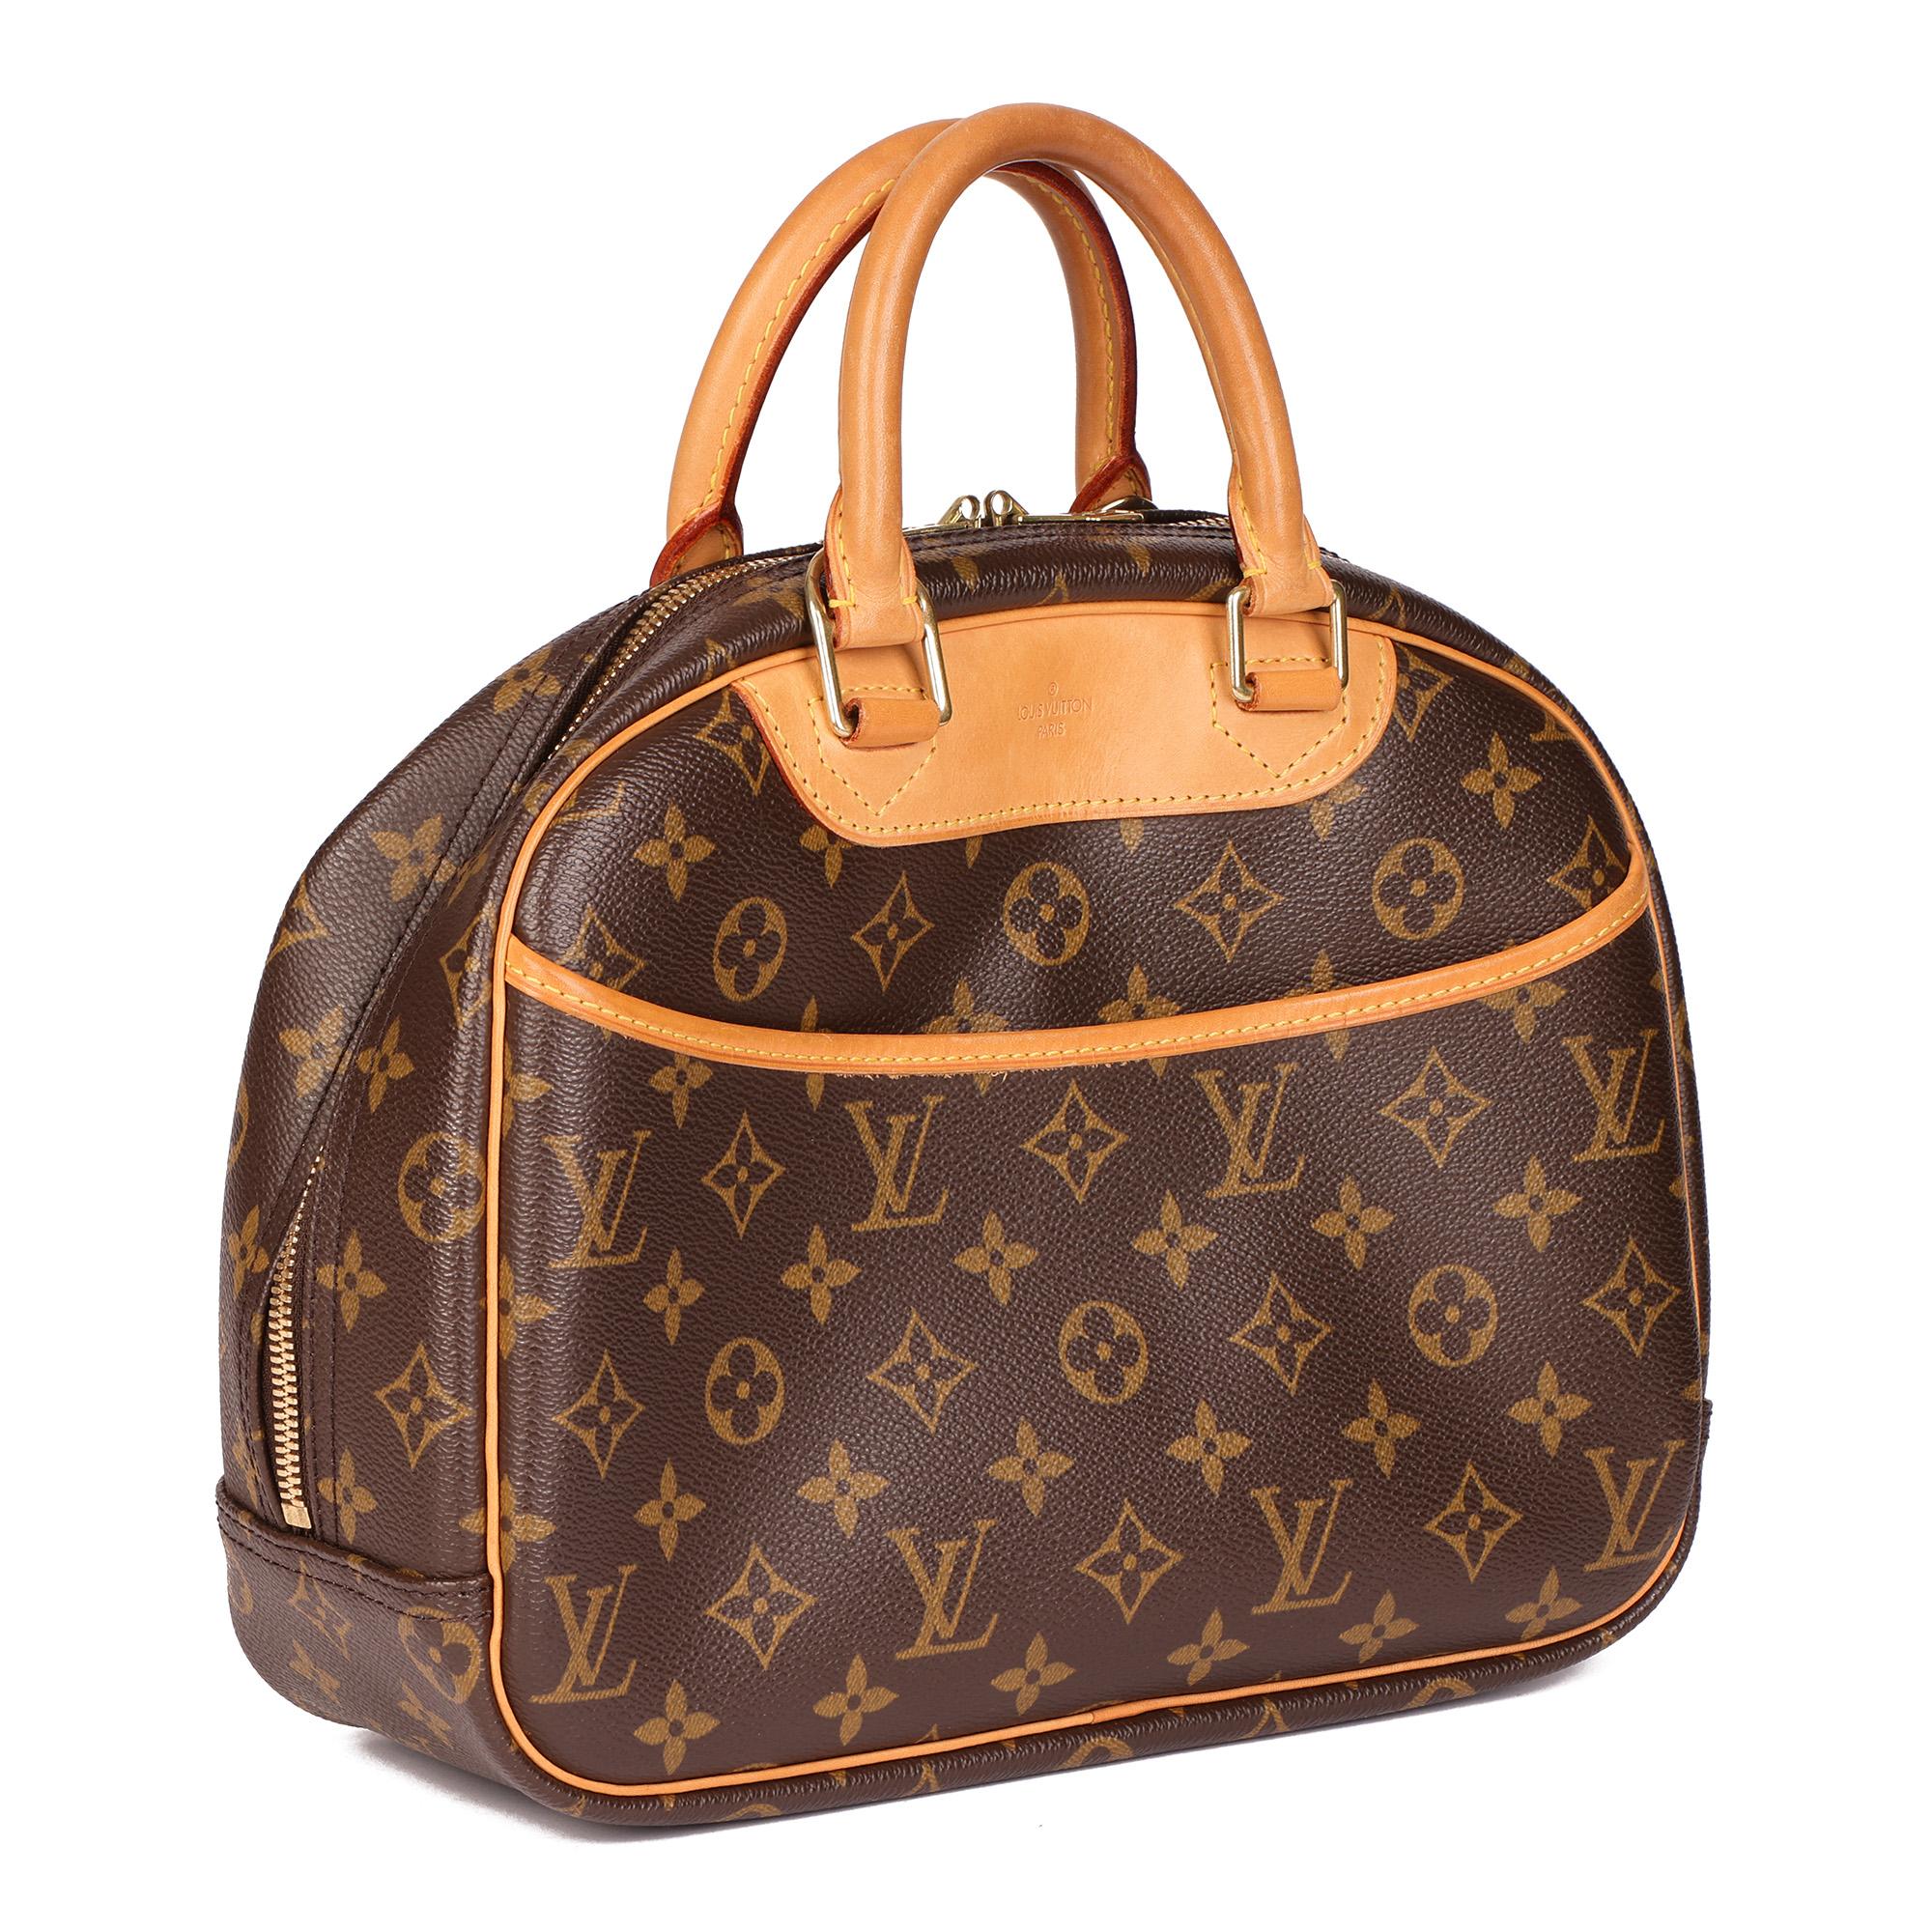 LOUIS VUITTON
Brown Monogram Coated Canvas & Vachetta Leather Trouville

Serial Number: SD0084
Age (Circa): 2004
Accompanied By: Louis Vuitton Dust Bag, Padlock
Authenticity Details: Date Stamp (Made in USA)
Gender: Ladies
Type: Tote

Colour: